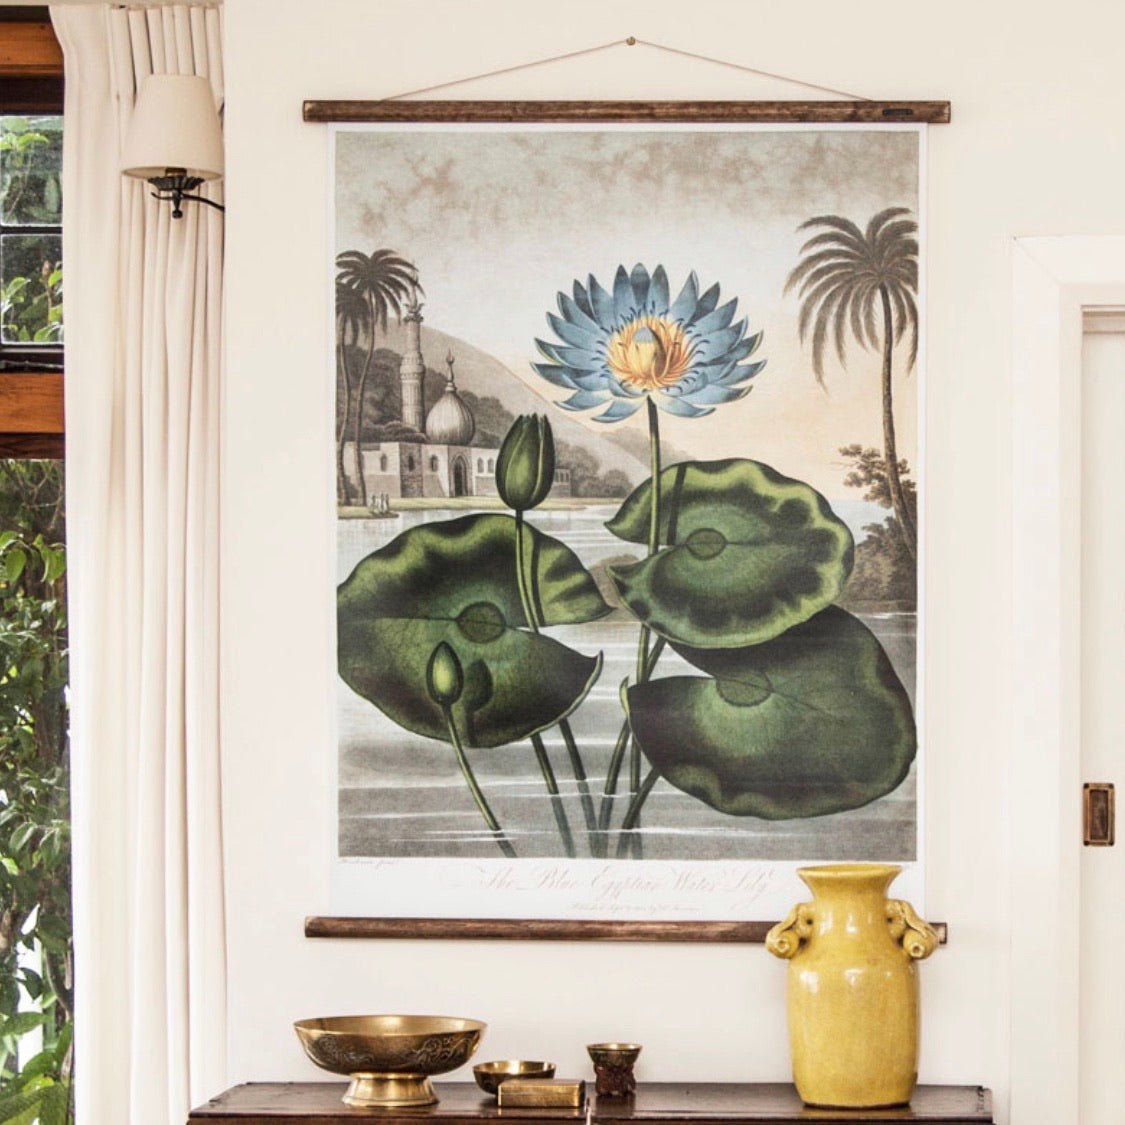 The Water Lily chart hanging on the wall in a living environment